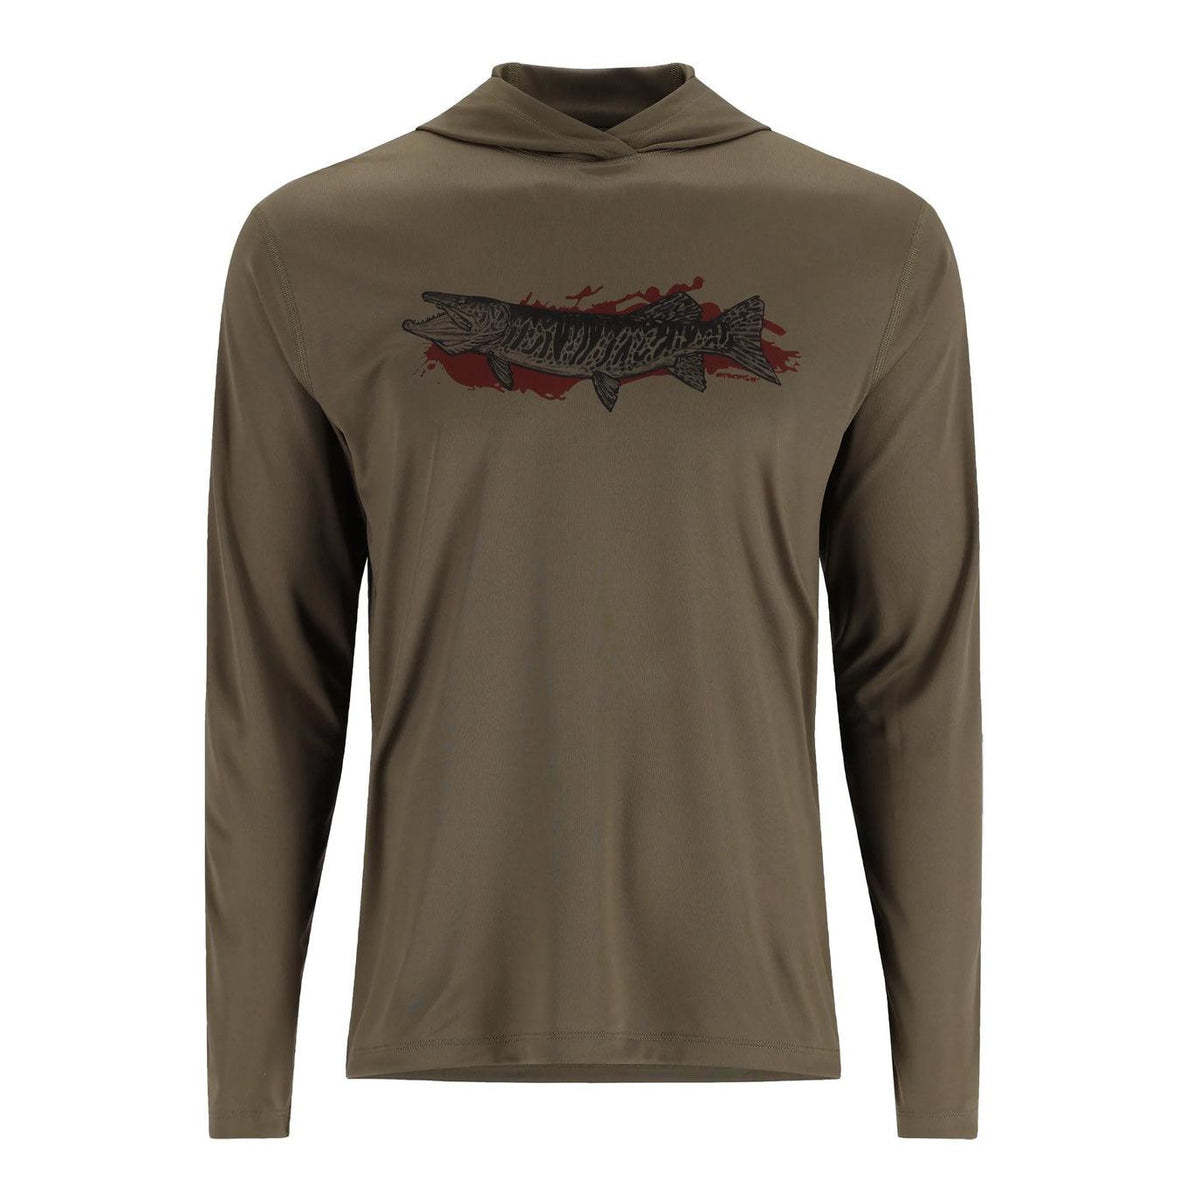 View of Hoodies-Sweatshirts M's Tech Hoody - Artist Series L Dark Stone/Musky available at EZOKO Pike and Musky Shop